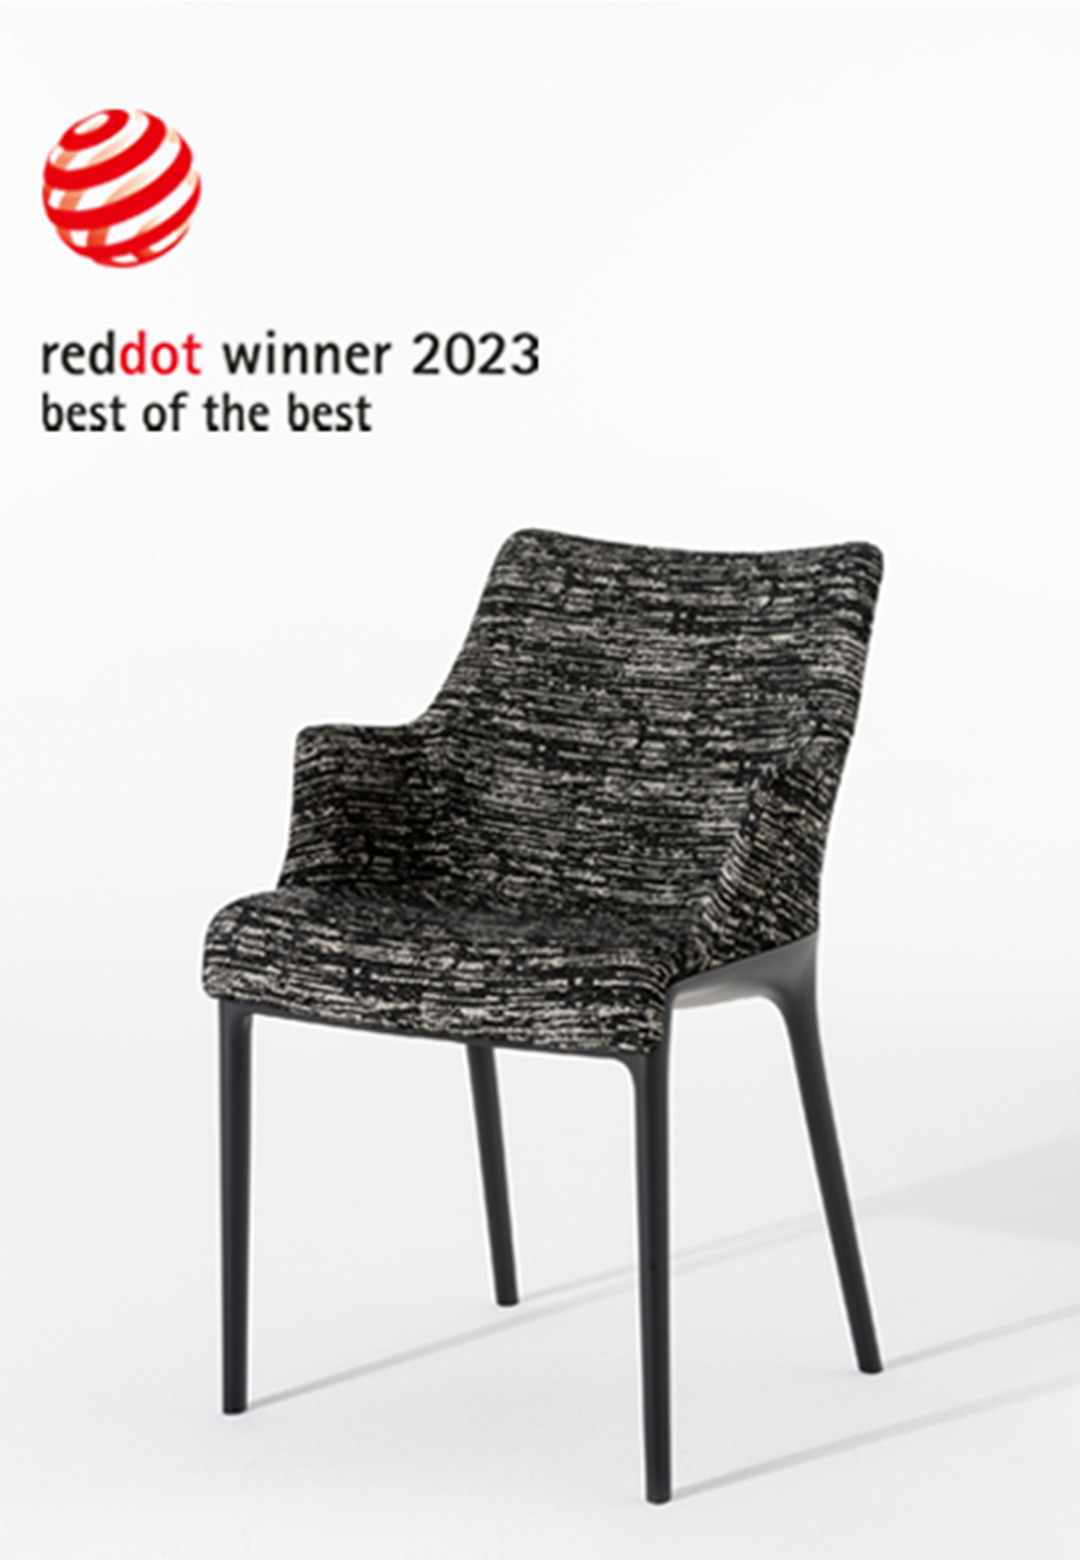 'Eleganza' by Kartell wins Red Dot for Best of the Best 2023 Award